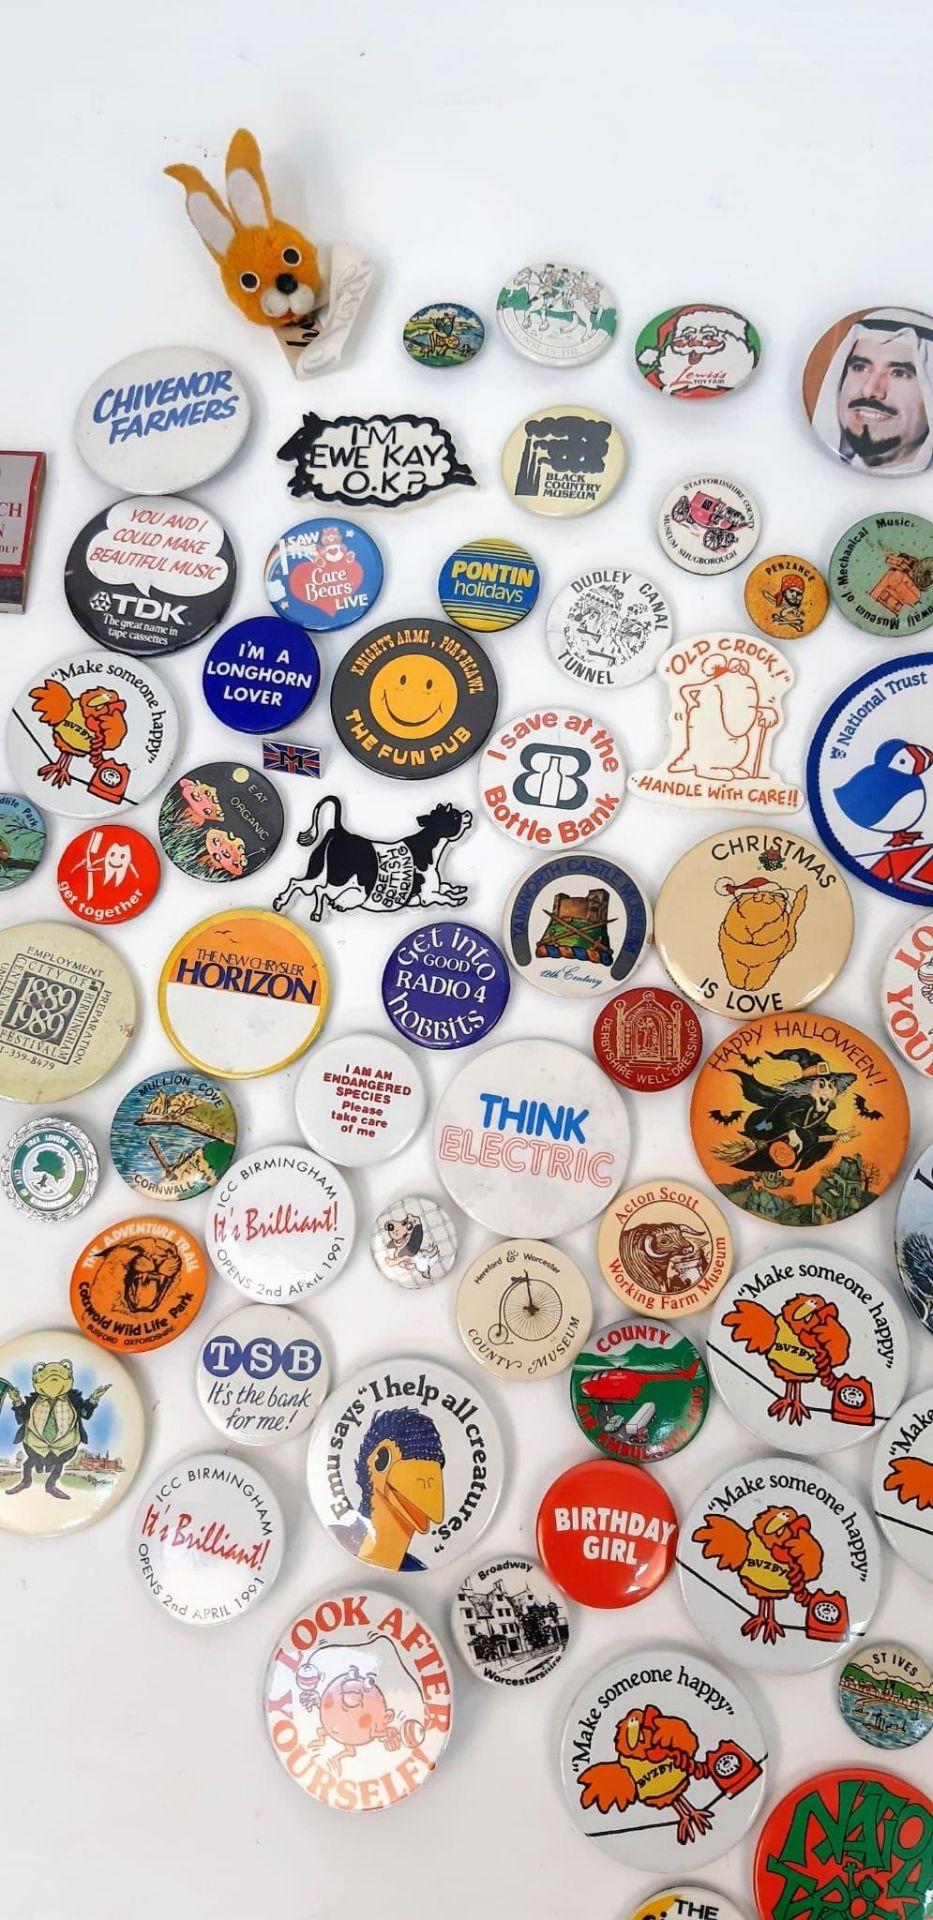 A Box of Vintage Pin Badges - Some absolute classics! - Image 7 of 8